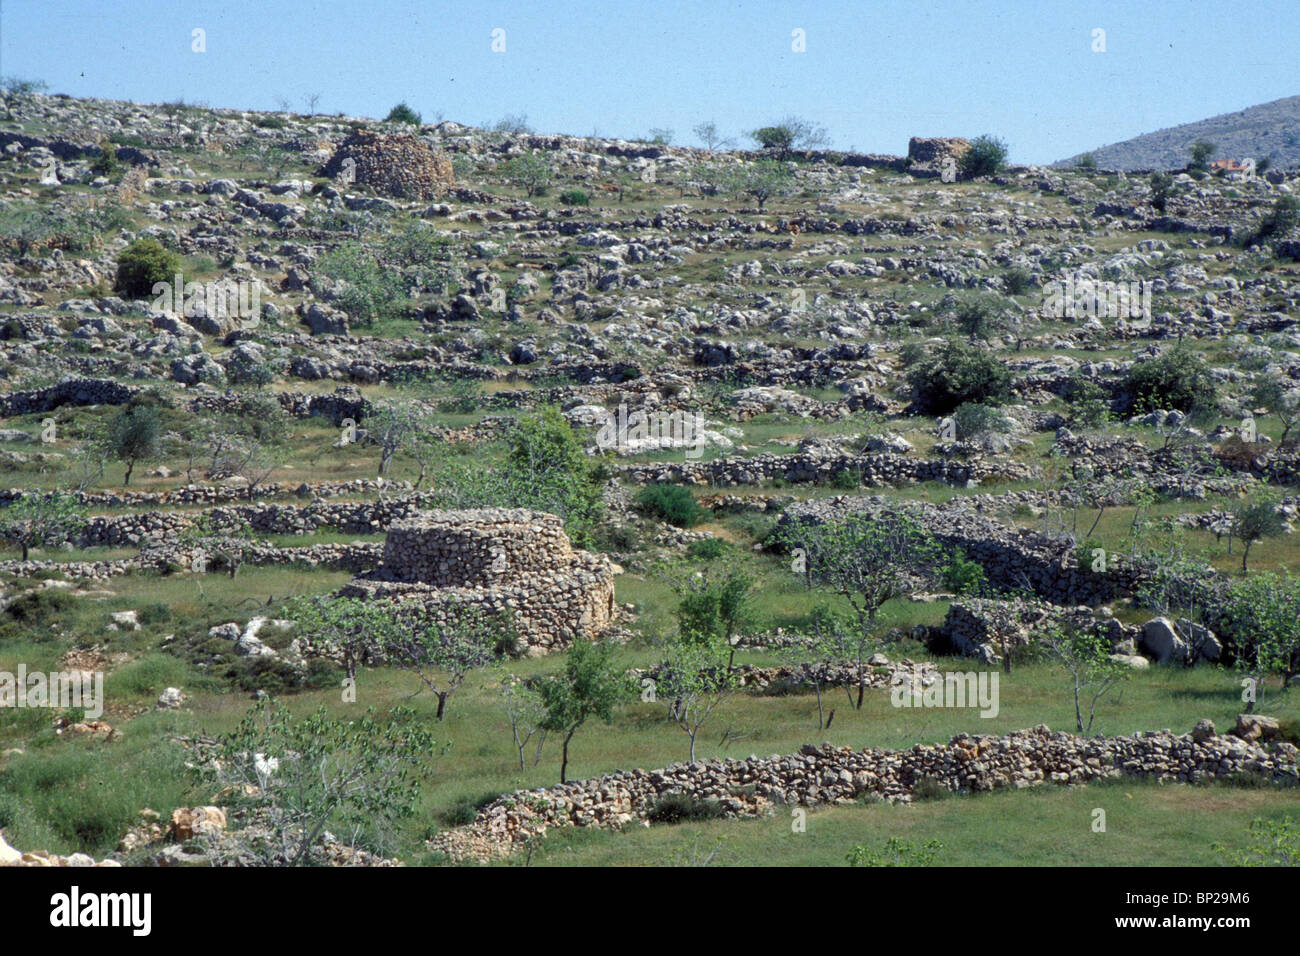 3132. SAMARIA - THE HILL-COUNTRY NORTH OF JERUSALEM, ONCE THE TERRITORY OF THE TRIBE OF BENJAMIN Stock Photo